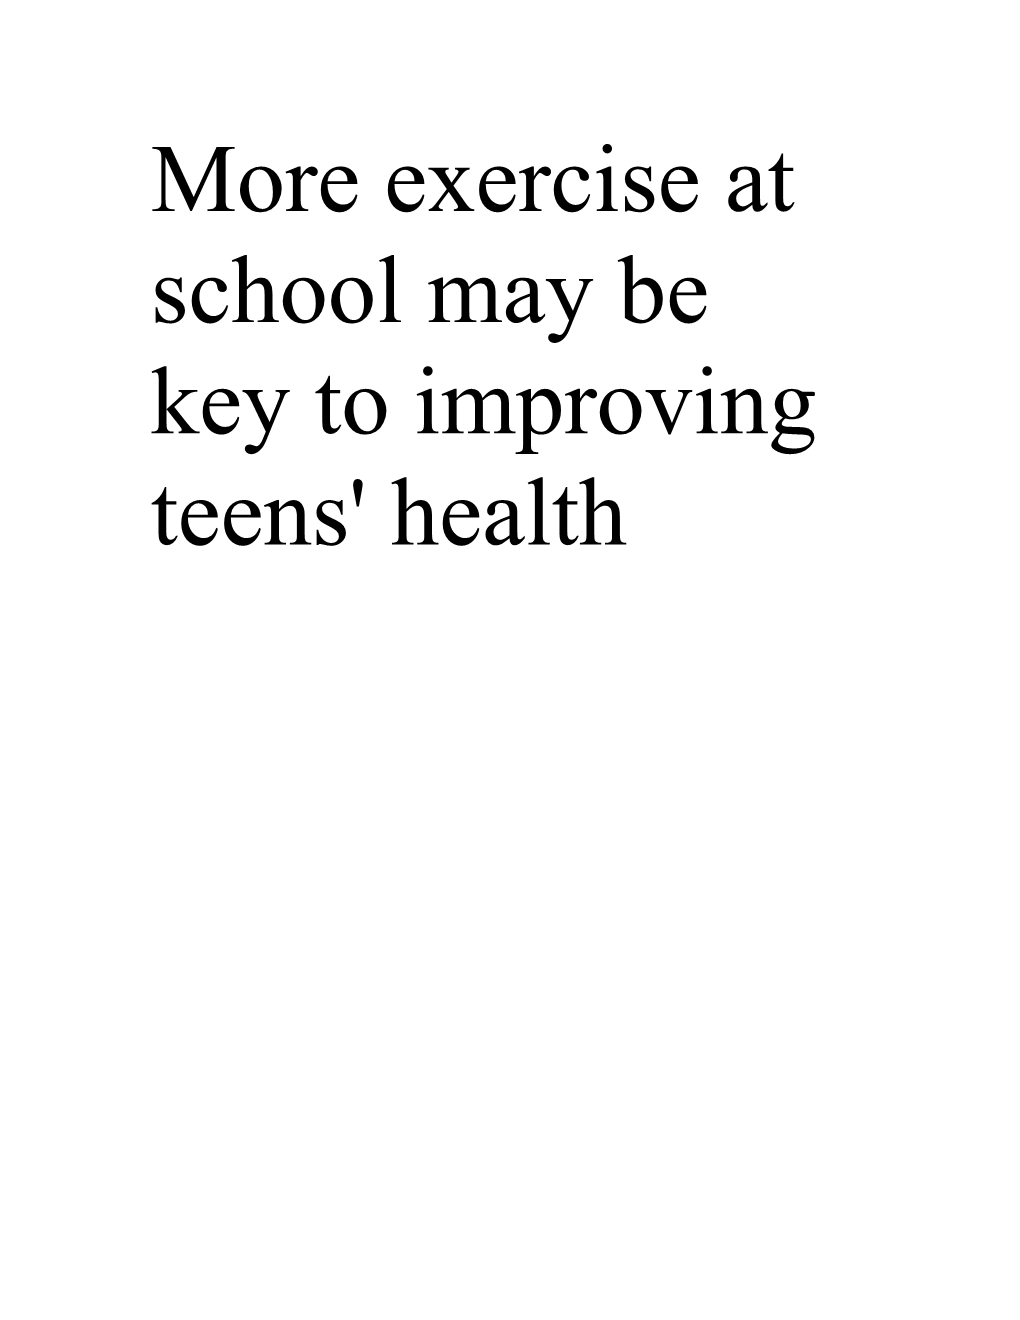 More Exercise at School May Be Key to Improving Teens' Health